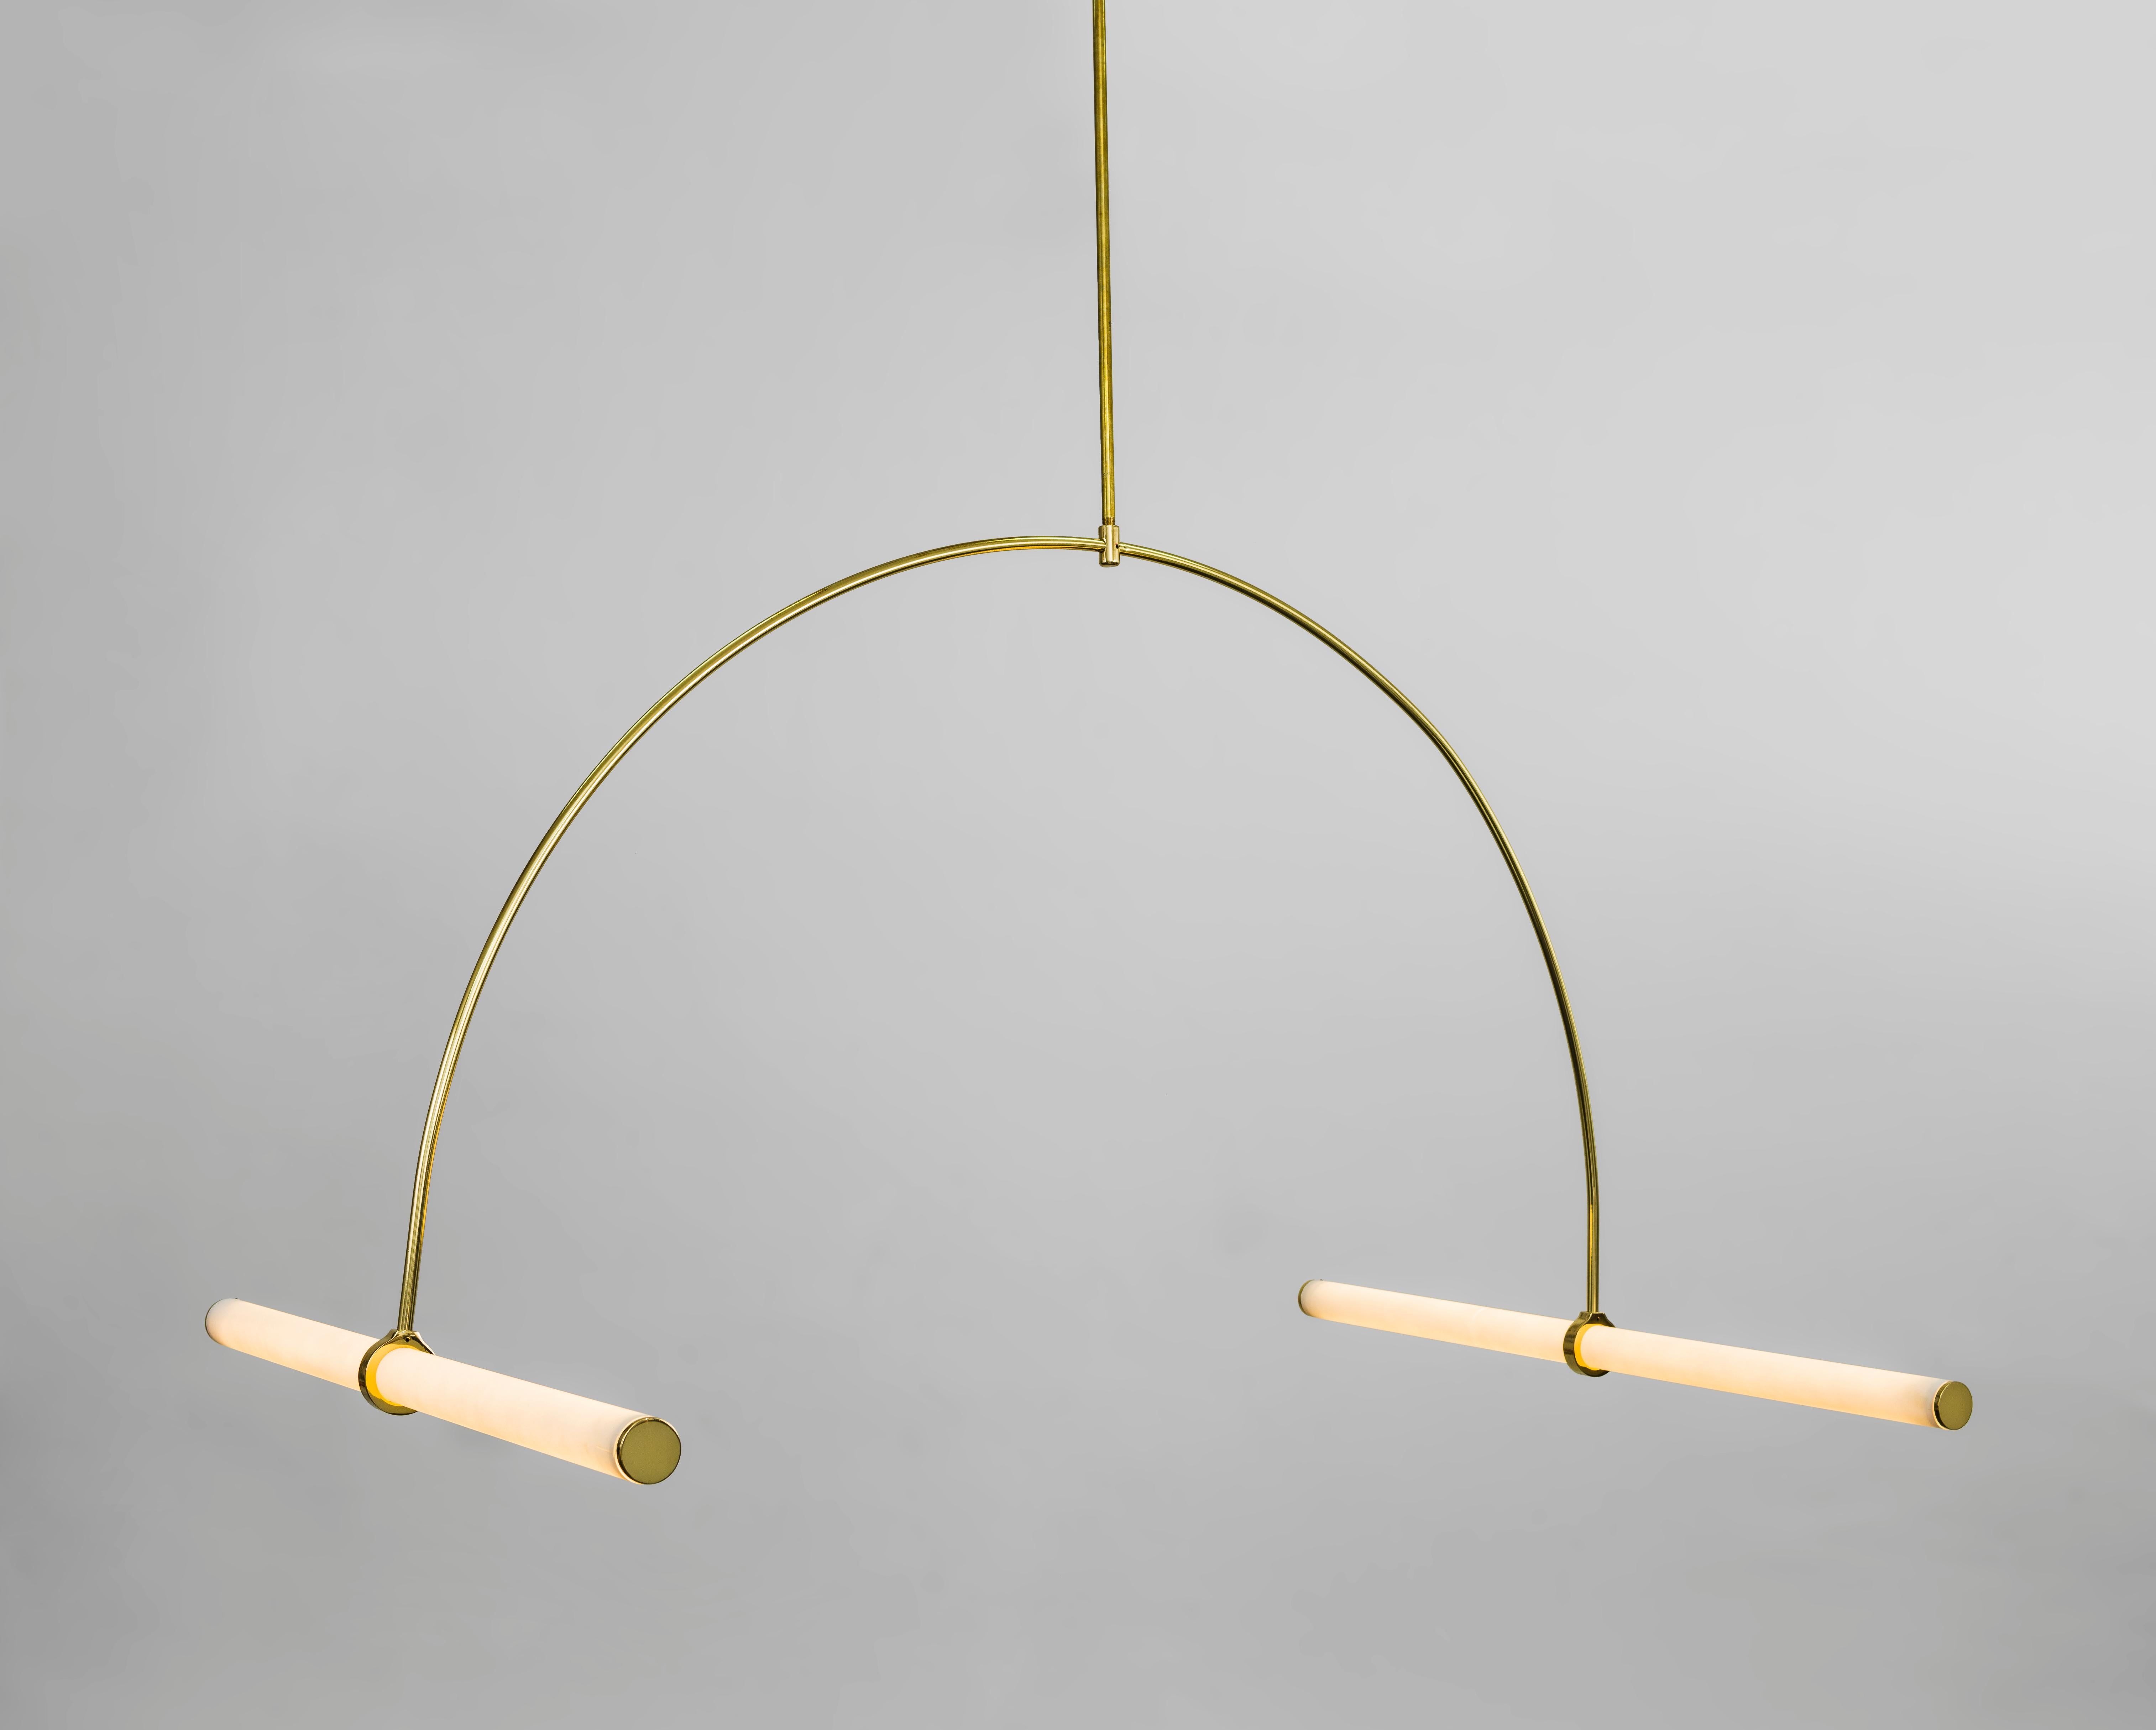 Tube pendant No. 1 by Naama Hofman.
Dimensions: W 106, H 124 cm (height to order).
Light tube diameter: 35 mm.
Brass pipe diameter: 10 mm.
Number of light tubes: 2.
Voltage: 110-240.
CE Approved
Material : Polished Brass pipe, Acrylic tube,